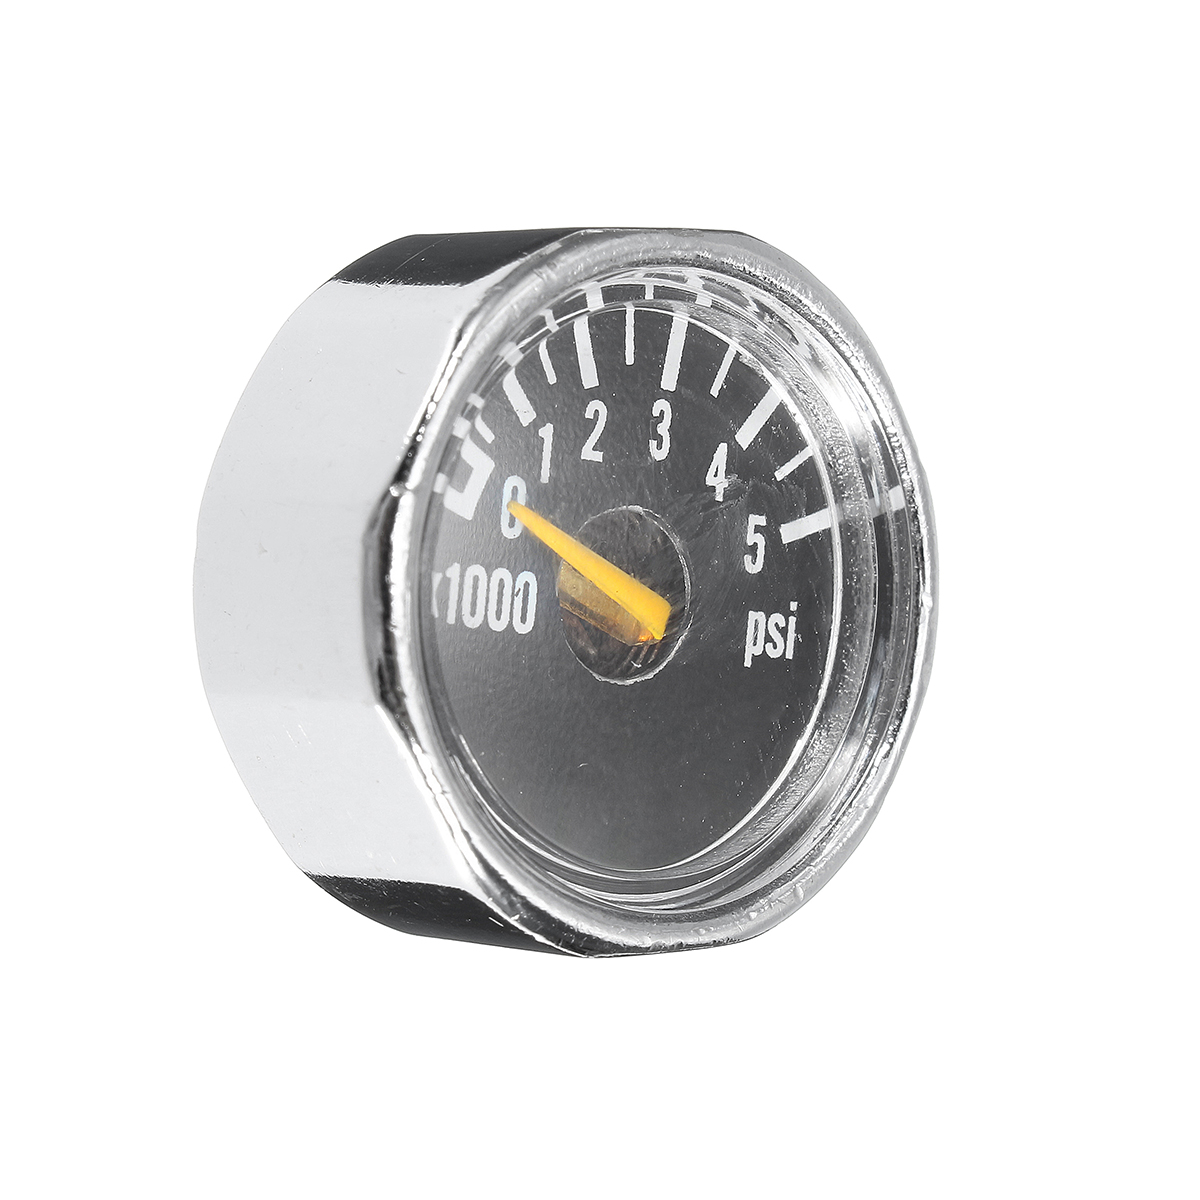 Micro-Gauge-1-inch-25mm-0-to-5000psi-High-Pressure-for-HPA-Paintball-Tank-CO2-PCP-1263873-3